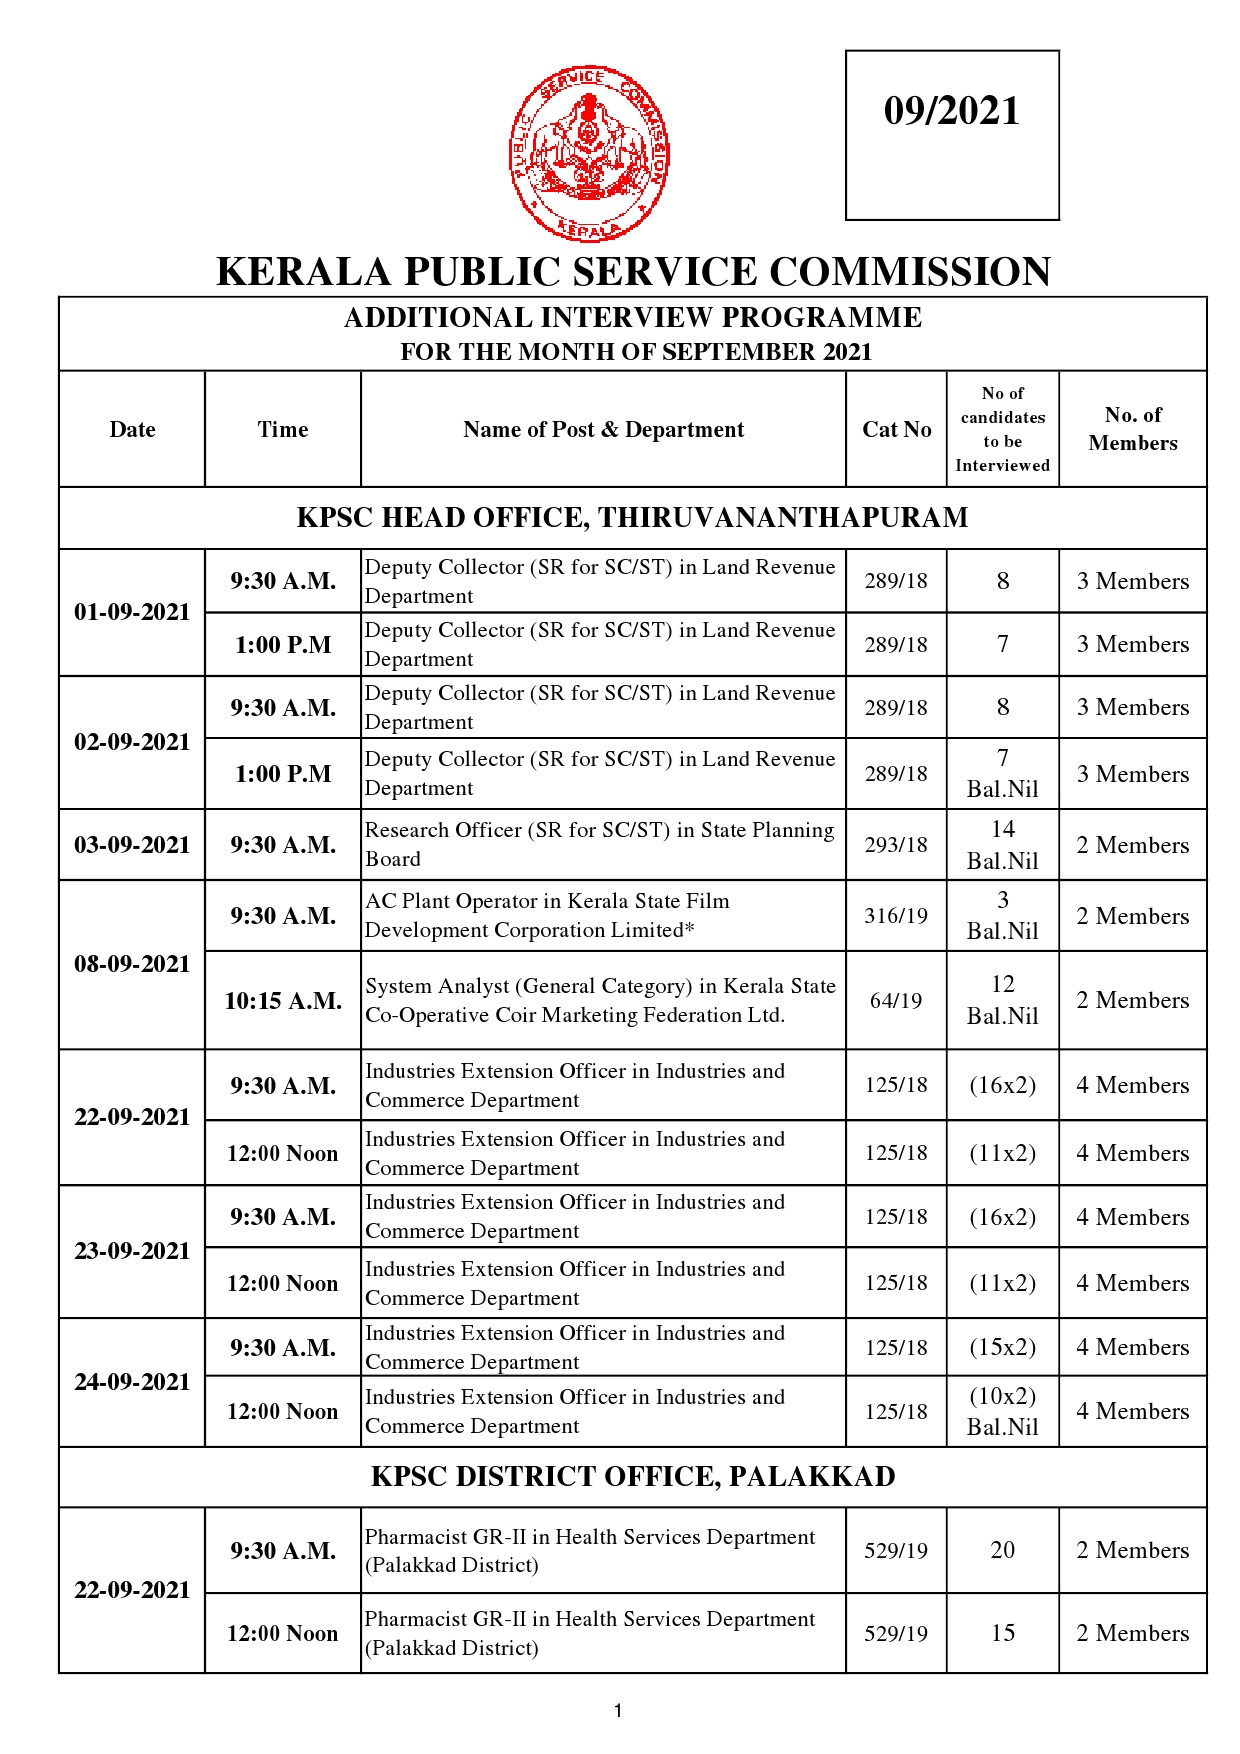 KPSC Additional Interview Programme For September 2021 - Notification Image 1